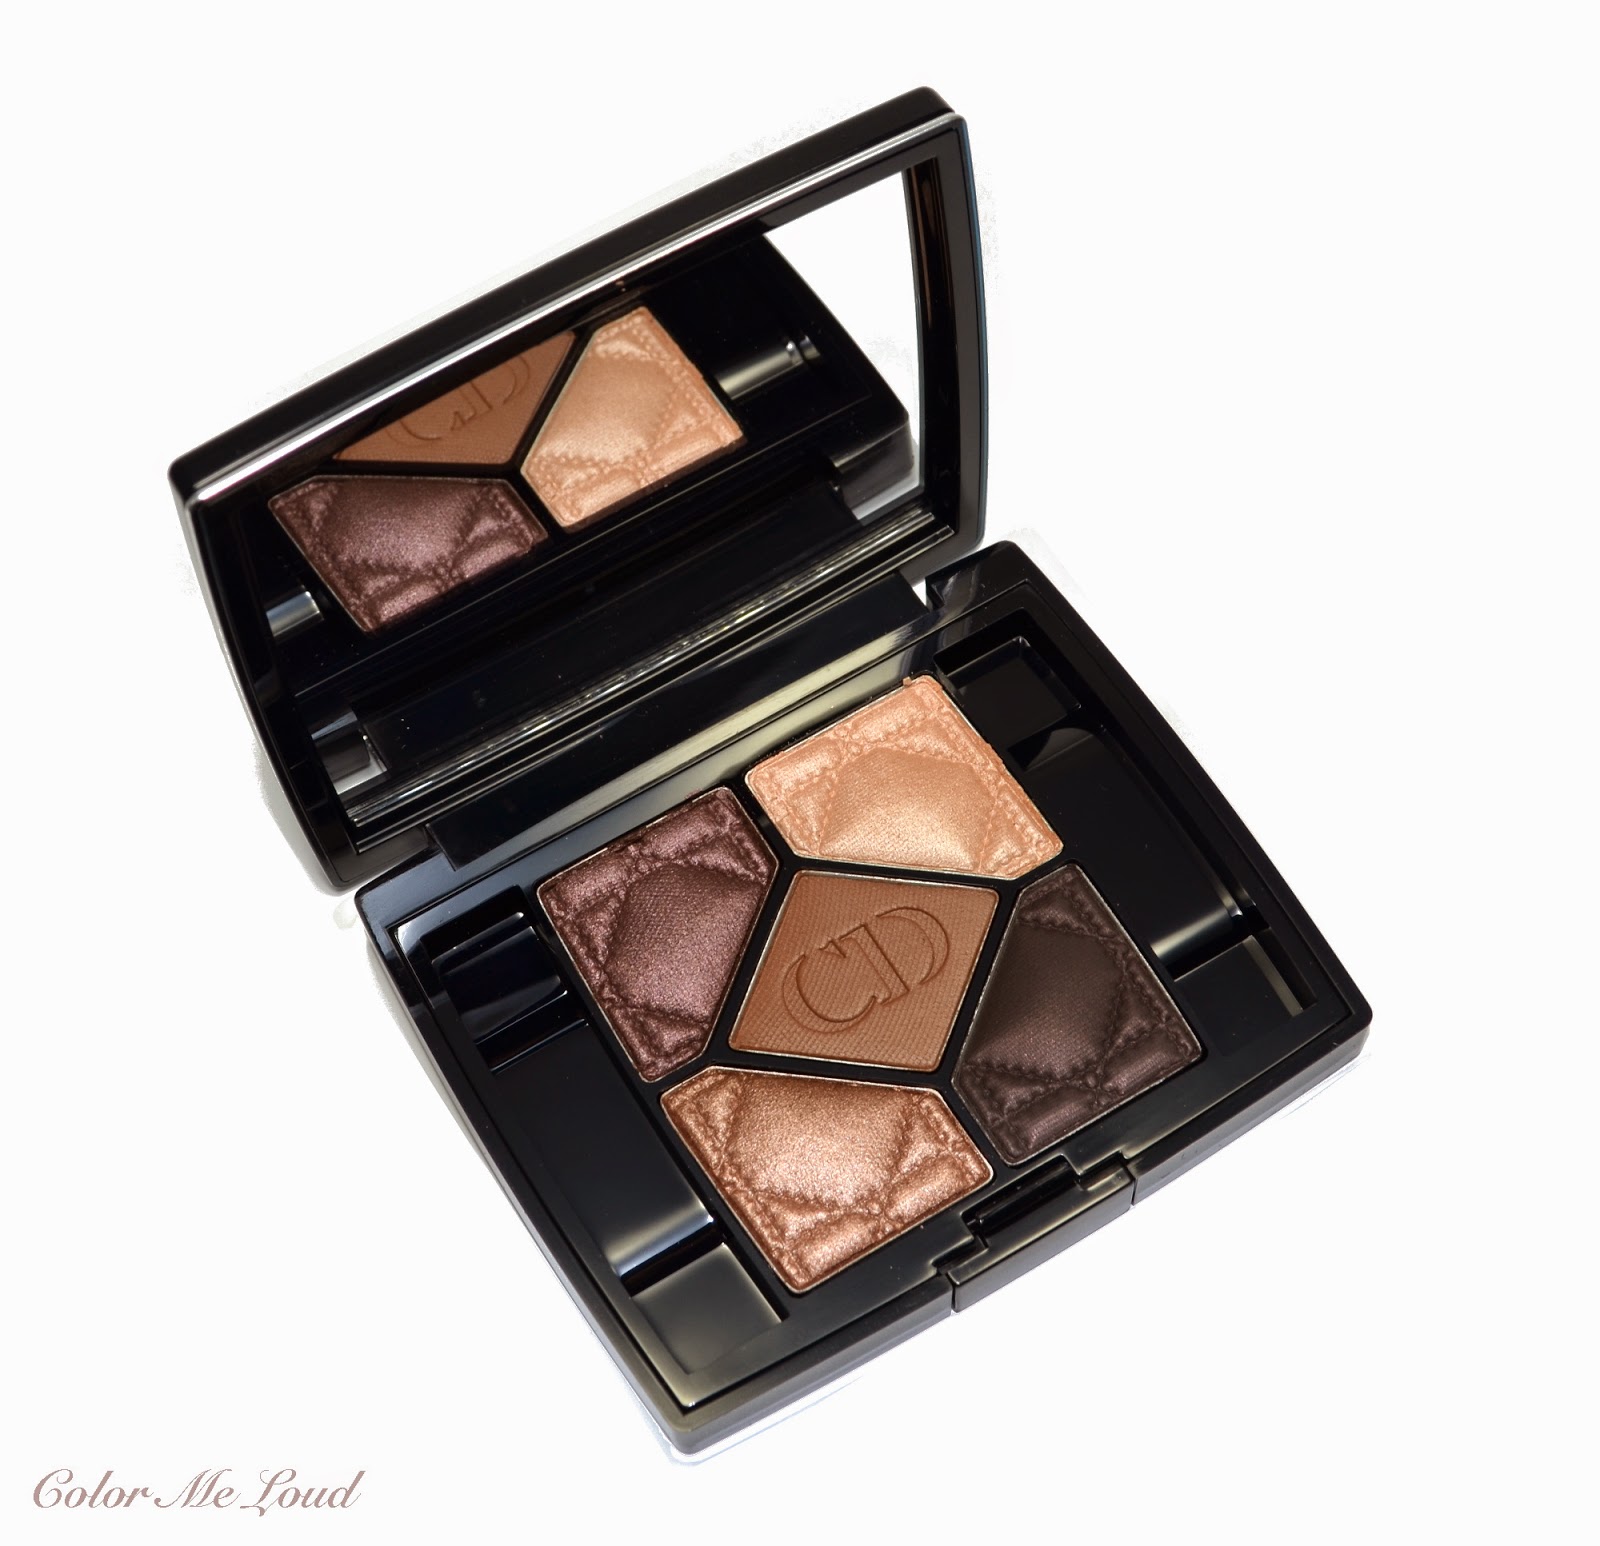 Dior 5 Couleurs Eye Shadow Palette #796 Cuir Cannage, Review, Swatch & FOTD 